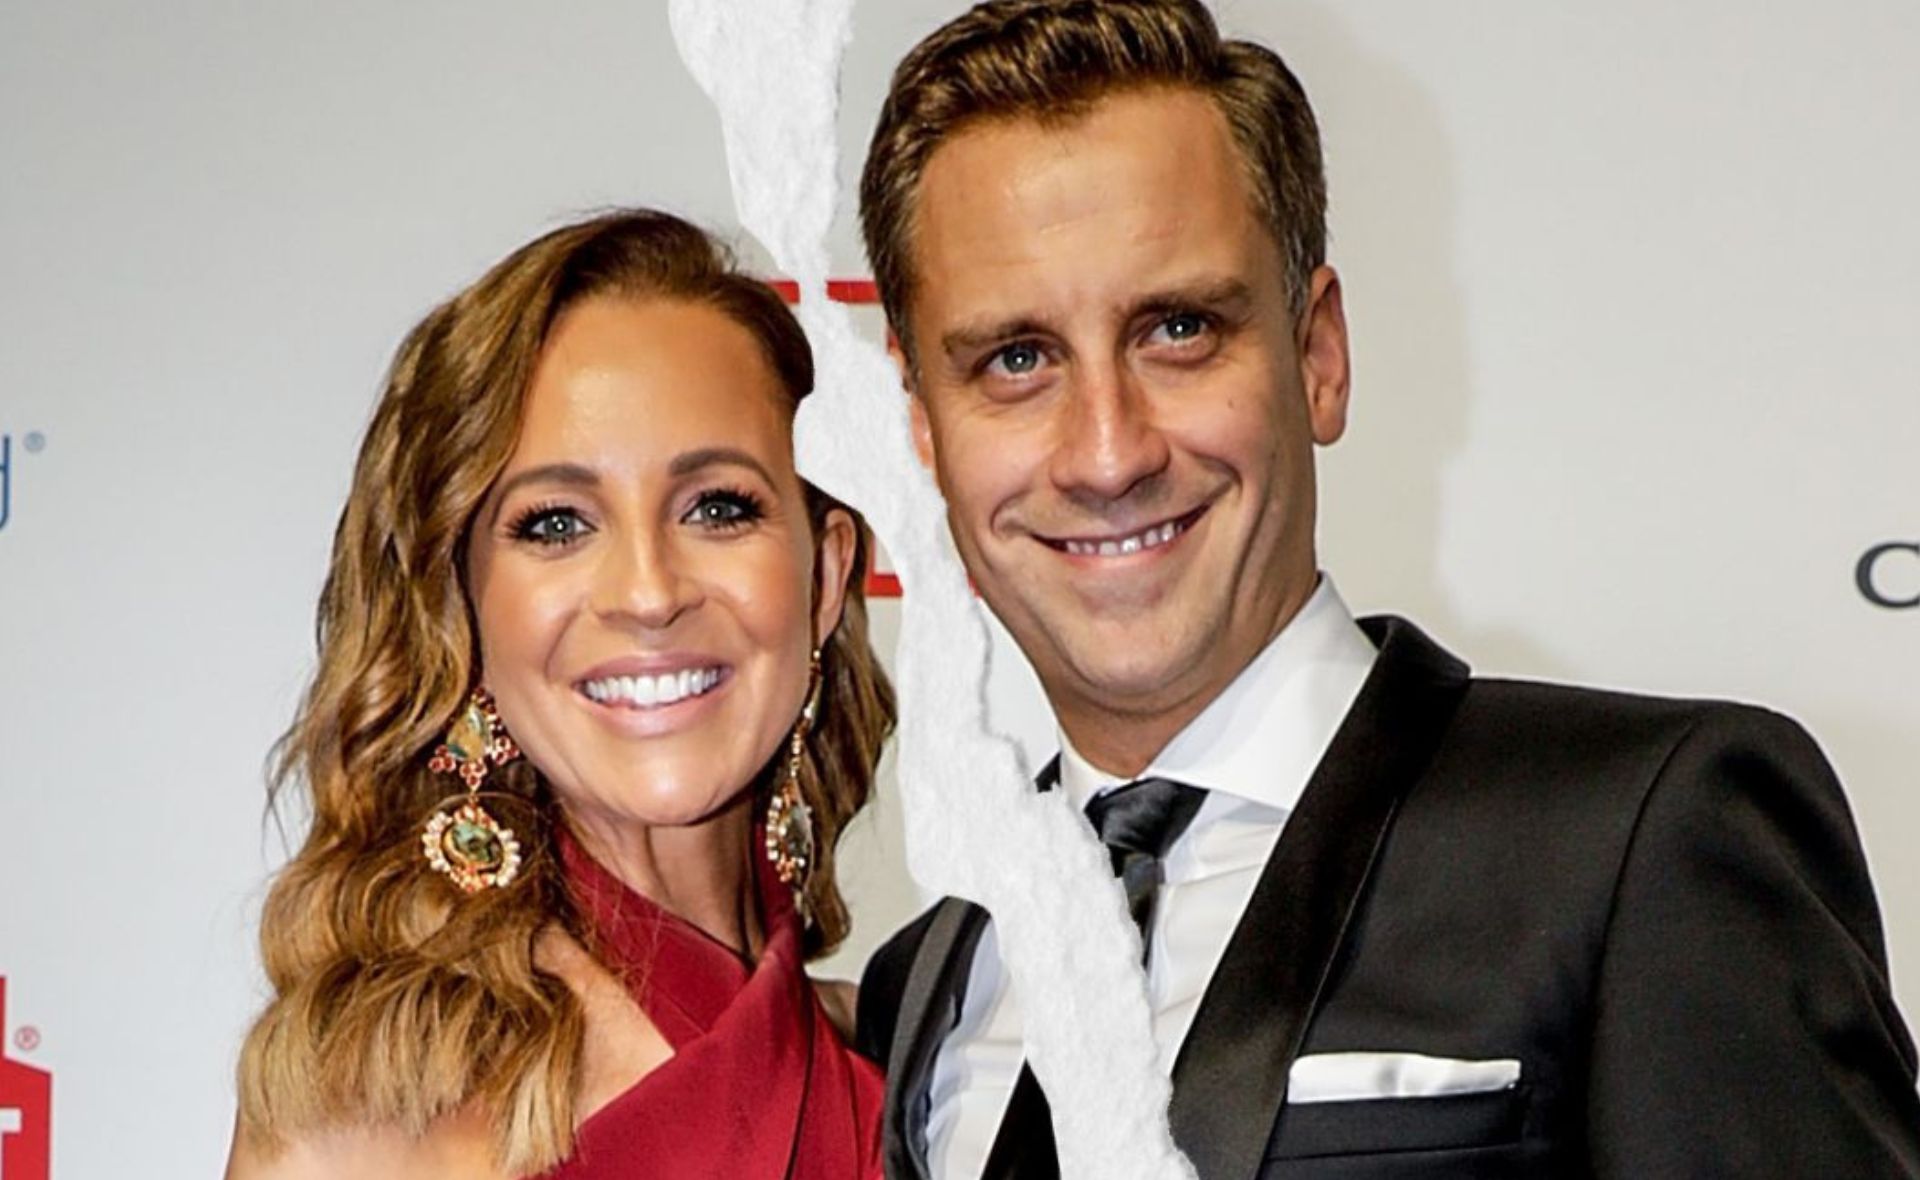 All the signs Carrie Bickmore and Chris Walker’s relationship was doomed